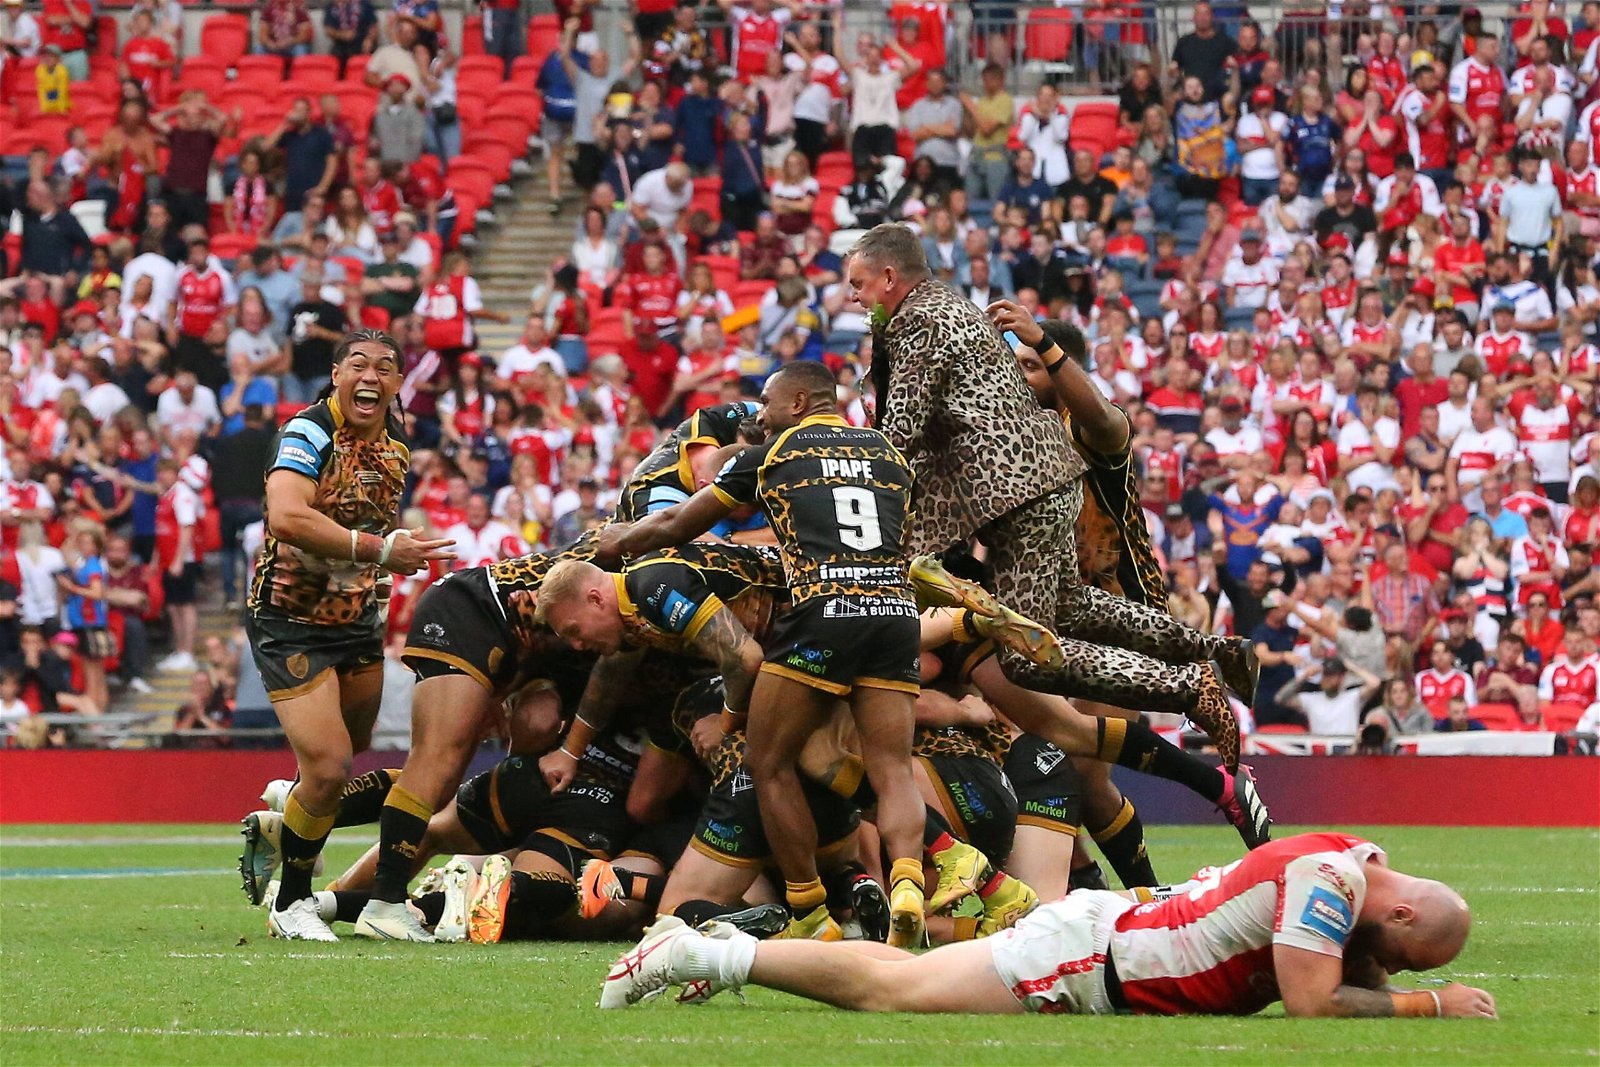 Leigh Leopards celebrate winning the Challenge Cup, as players pile-on. At Wembley Stadium.